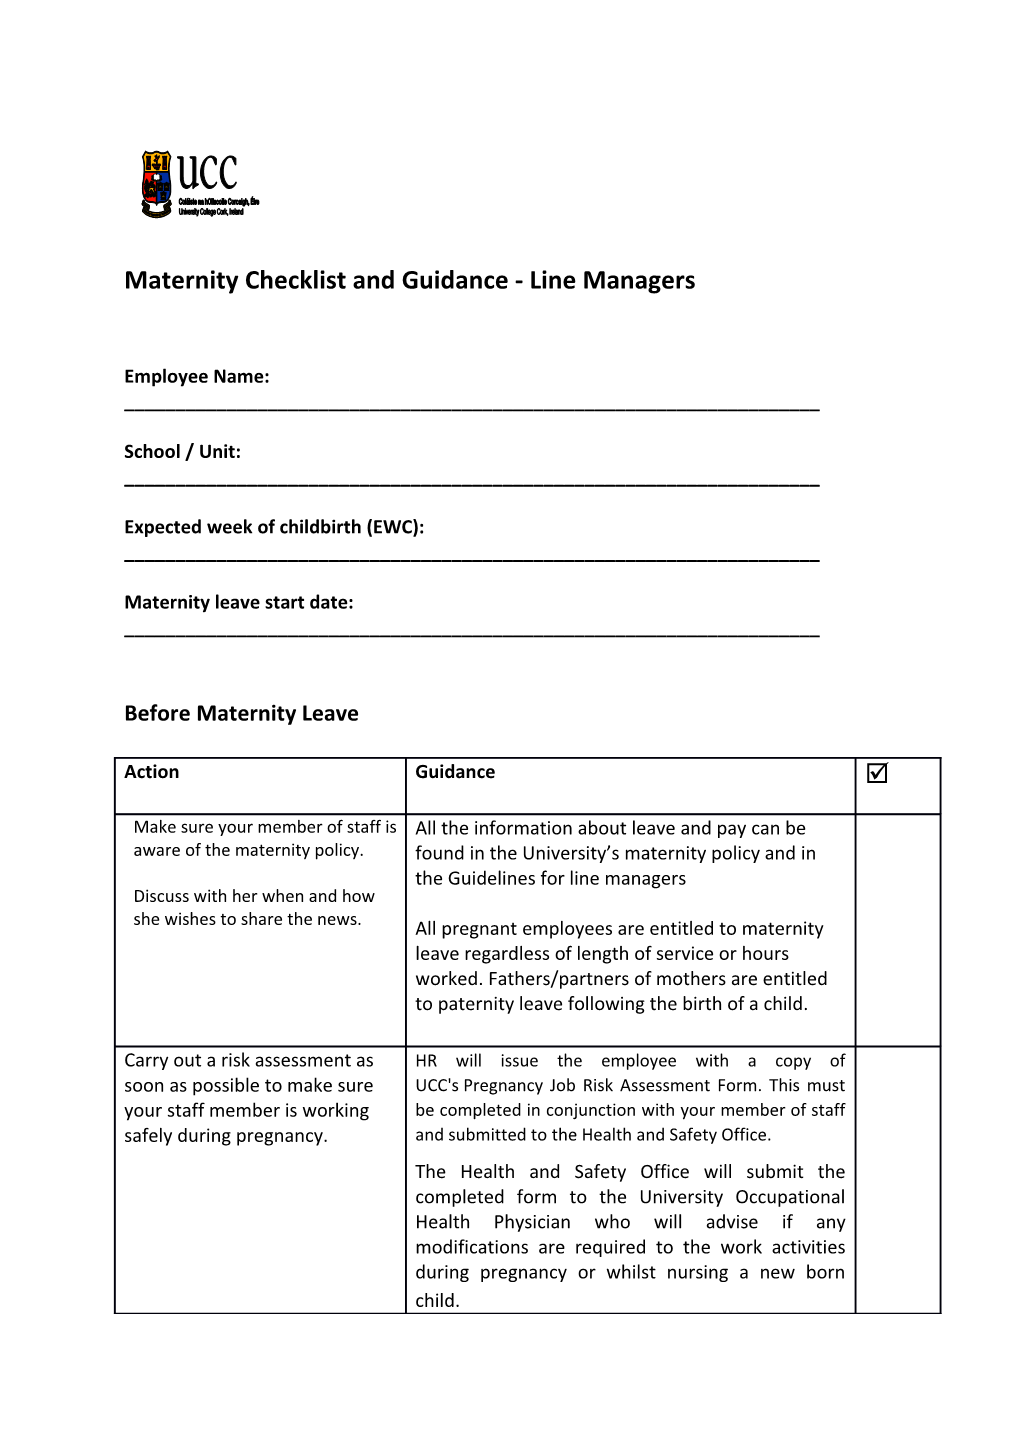 Maternity Checklist and Guidance - Line Managers